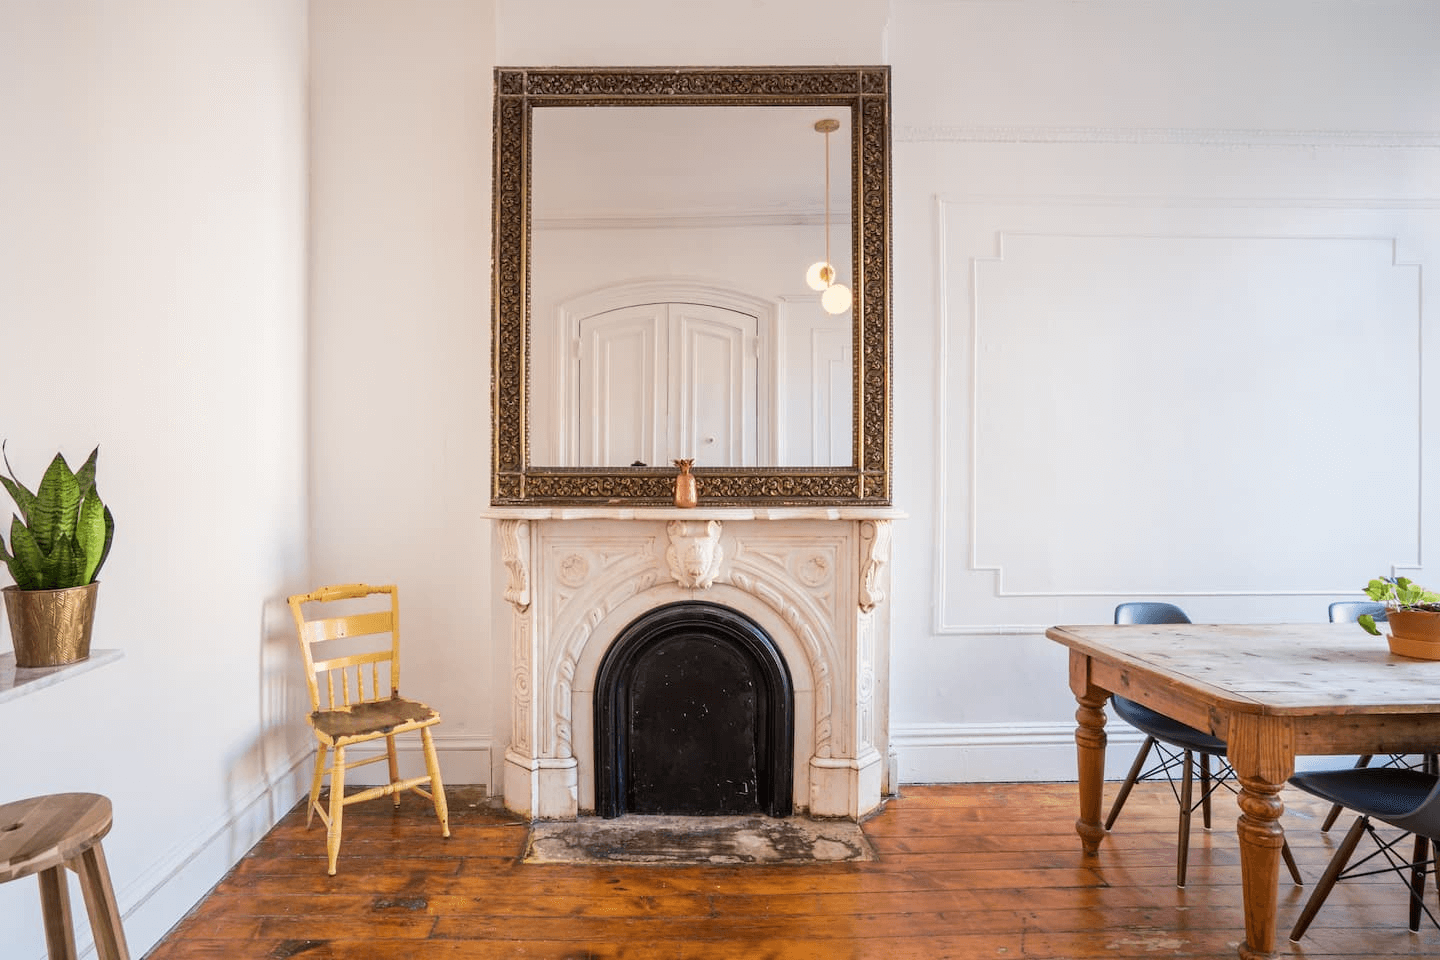 marble mantel in the living room